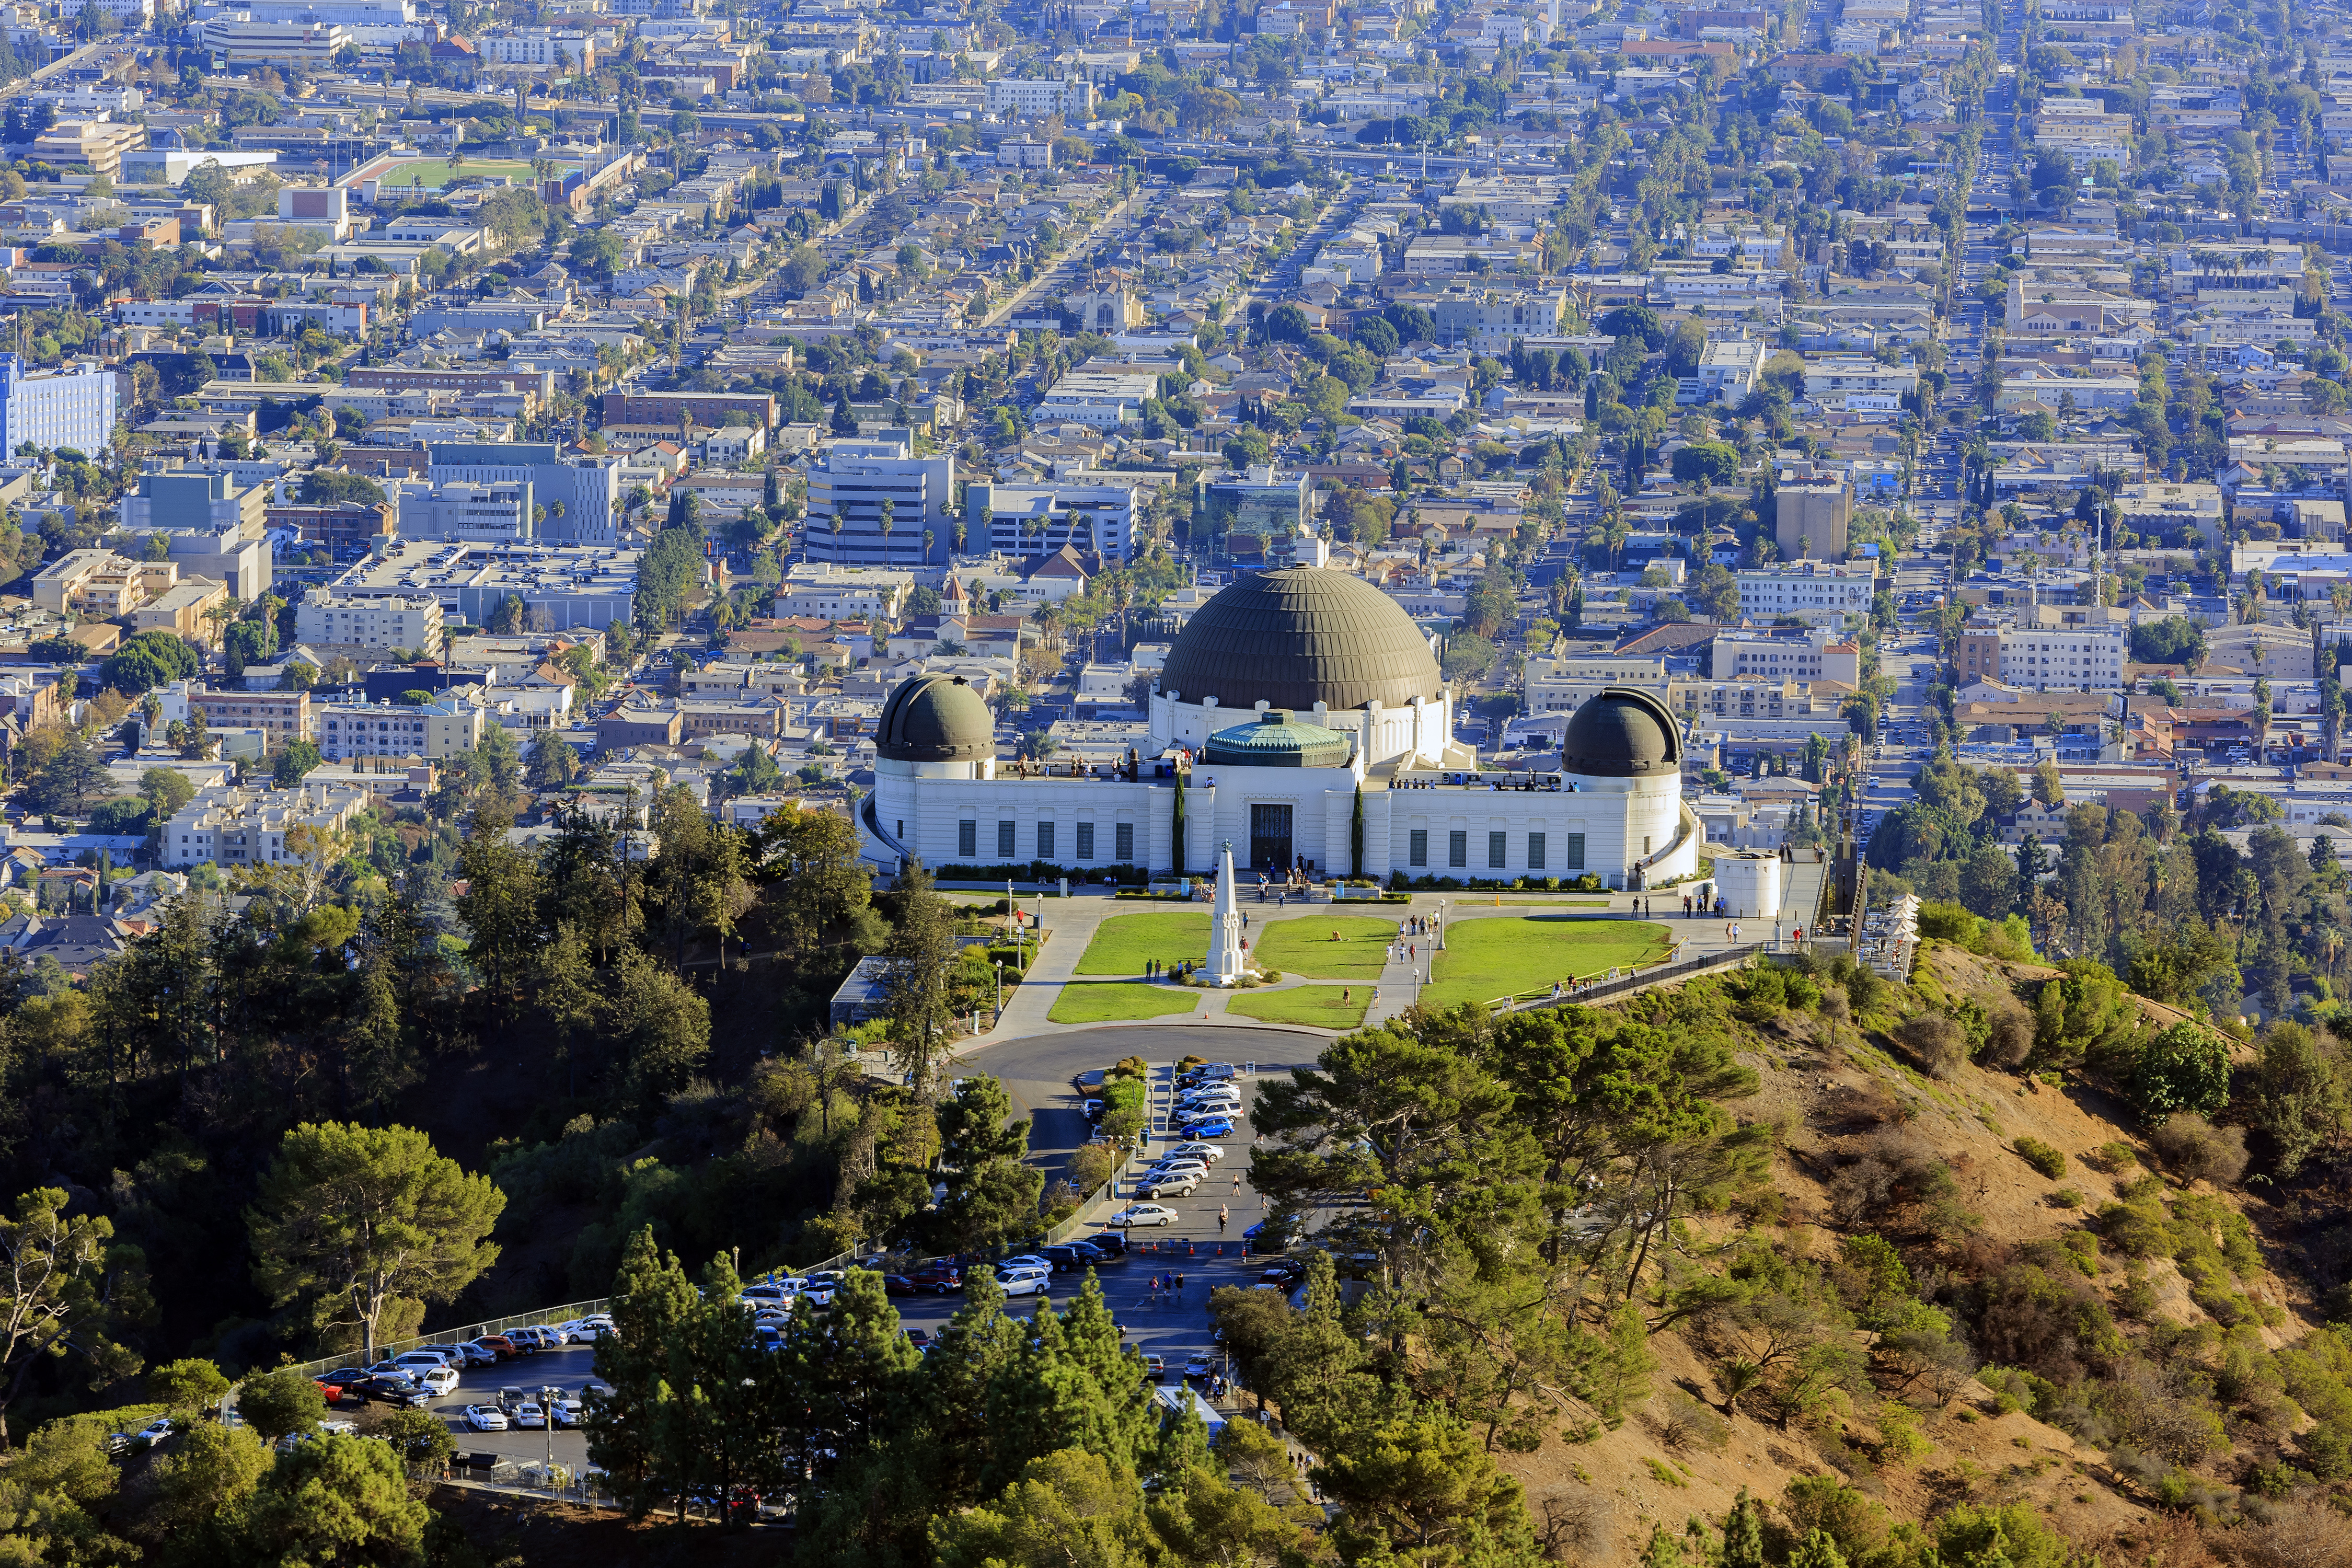 View from above Griffith Observatory